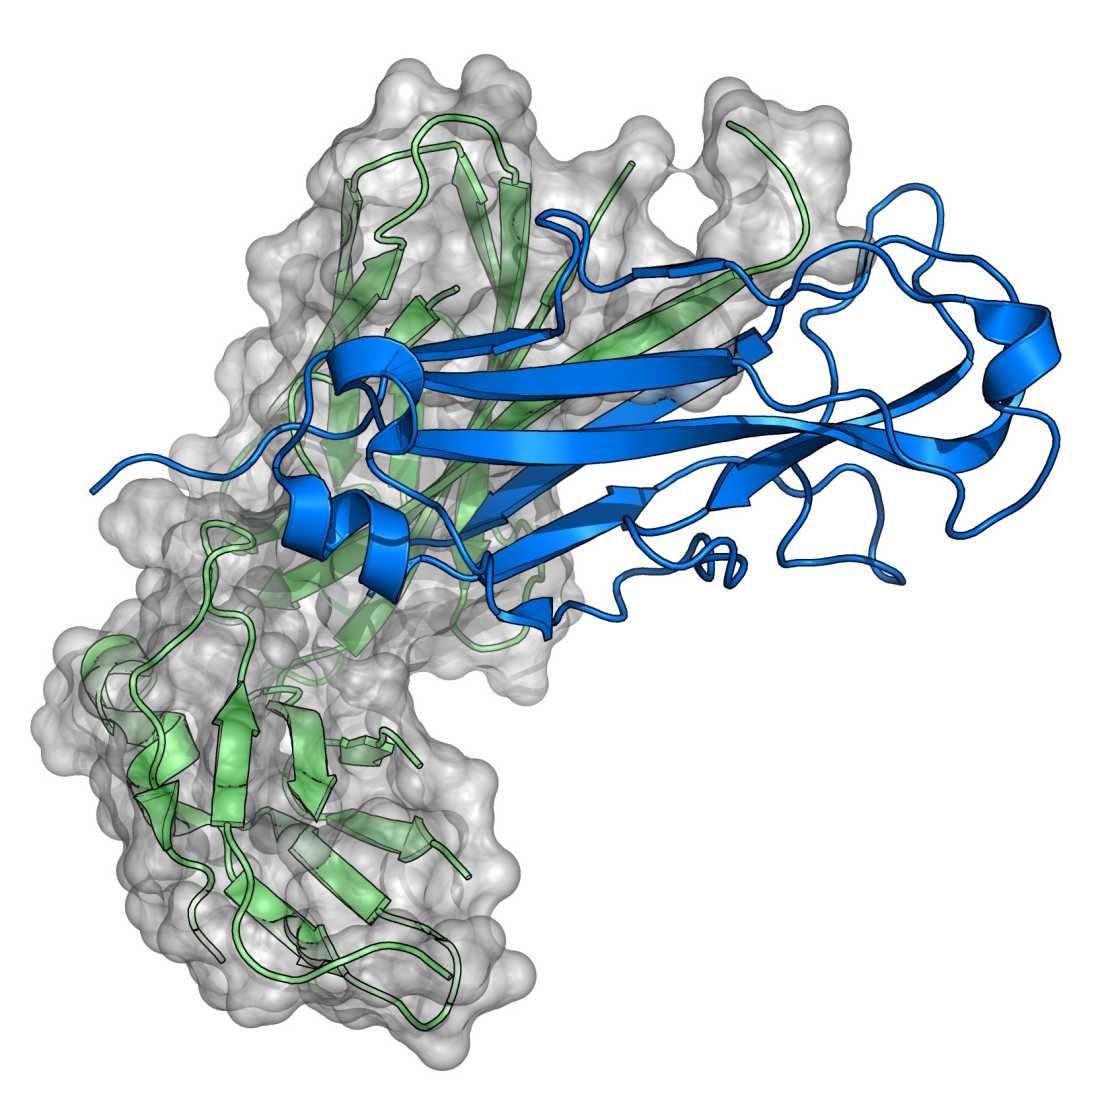 Enlarged view: Structure of the major type 1 pilus subunit FIMA bound to the FIMC (4DWH)